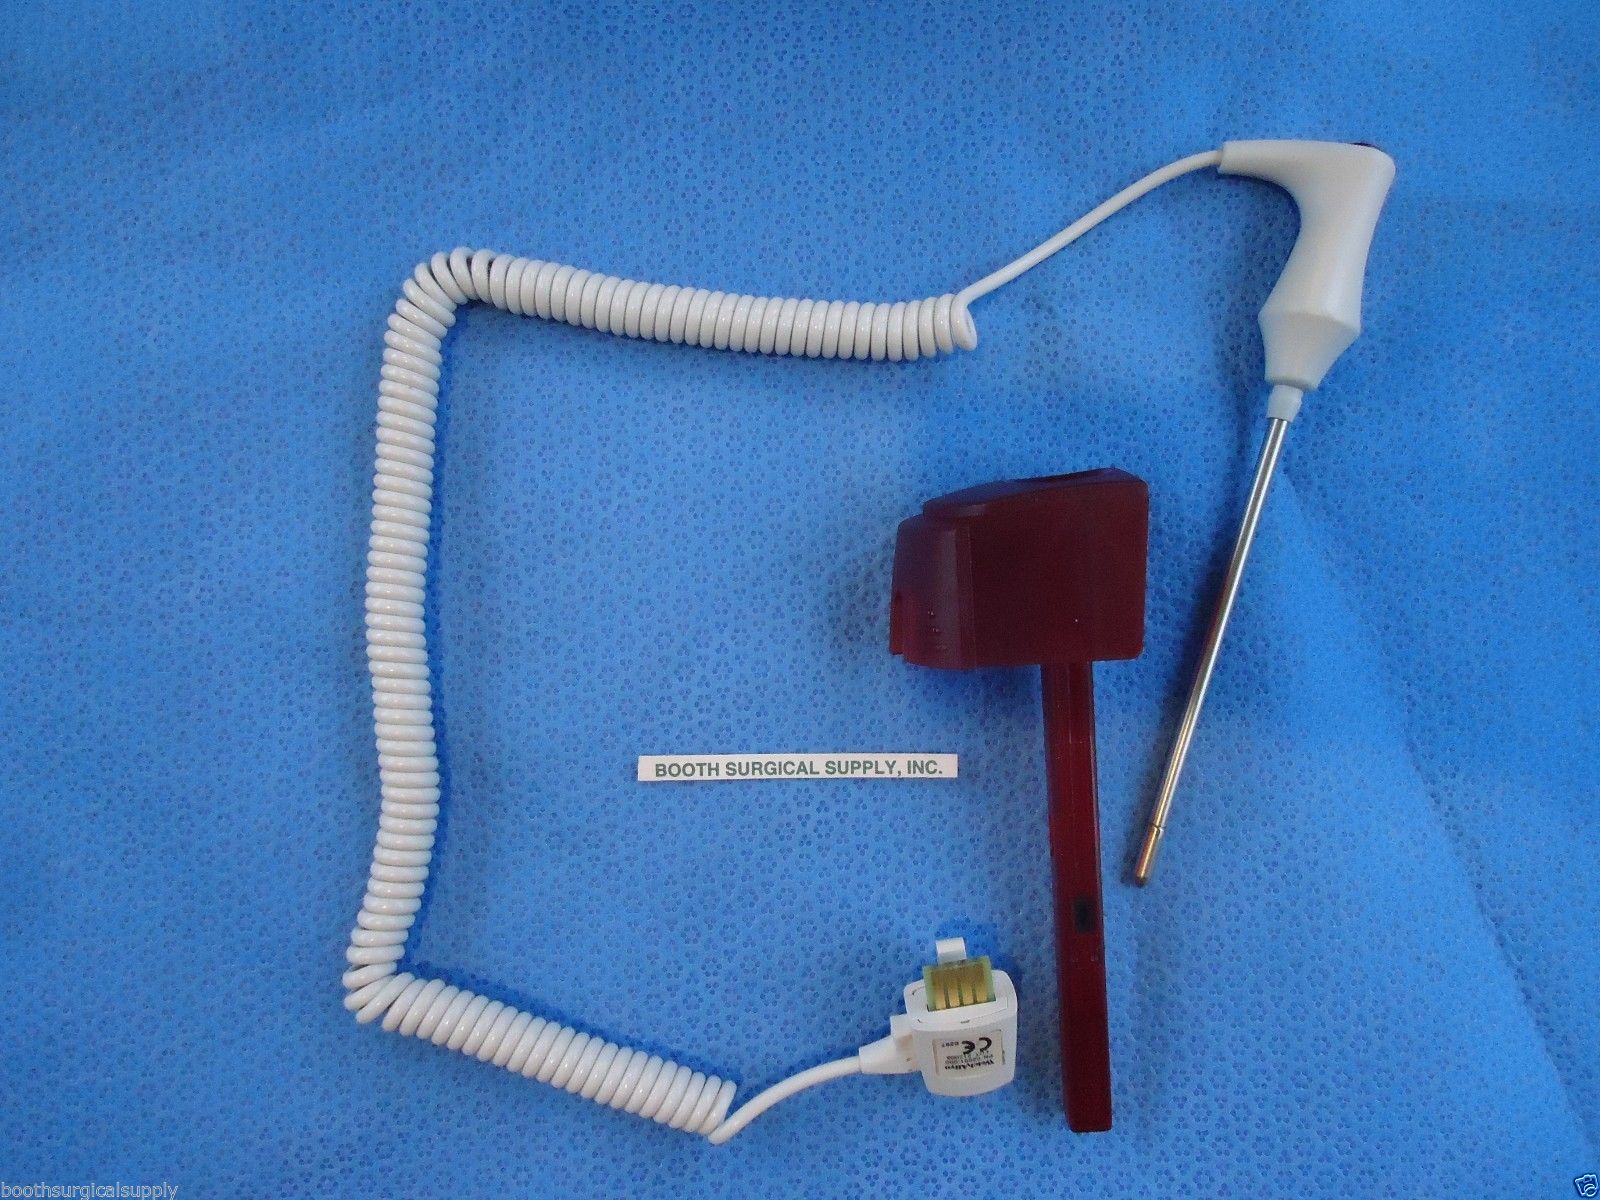 WELCH ALLYN # 02892-000 PROBE & WELL KIT 4' RECTAL FOR 690/692 THERMOMETERS-NEW! 732094026016 DIAGNOSTIC ULTRASOUND MACHINES FOR SALE